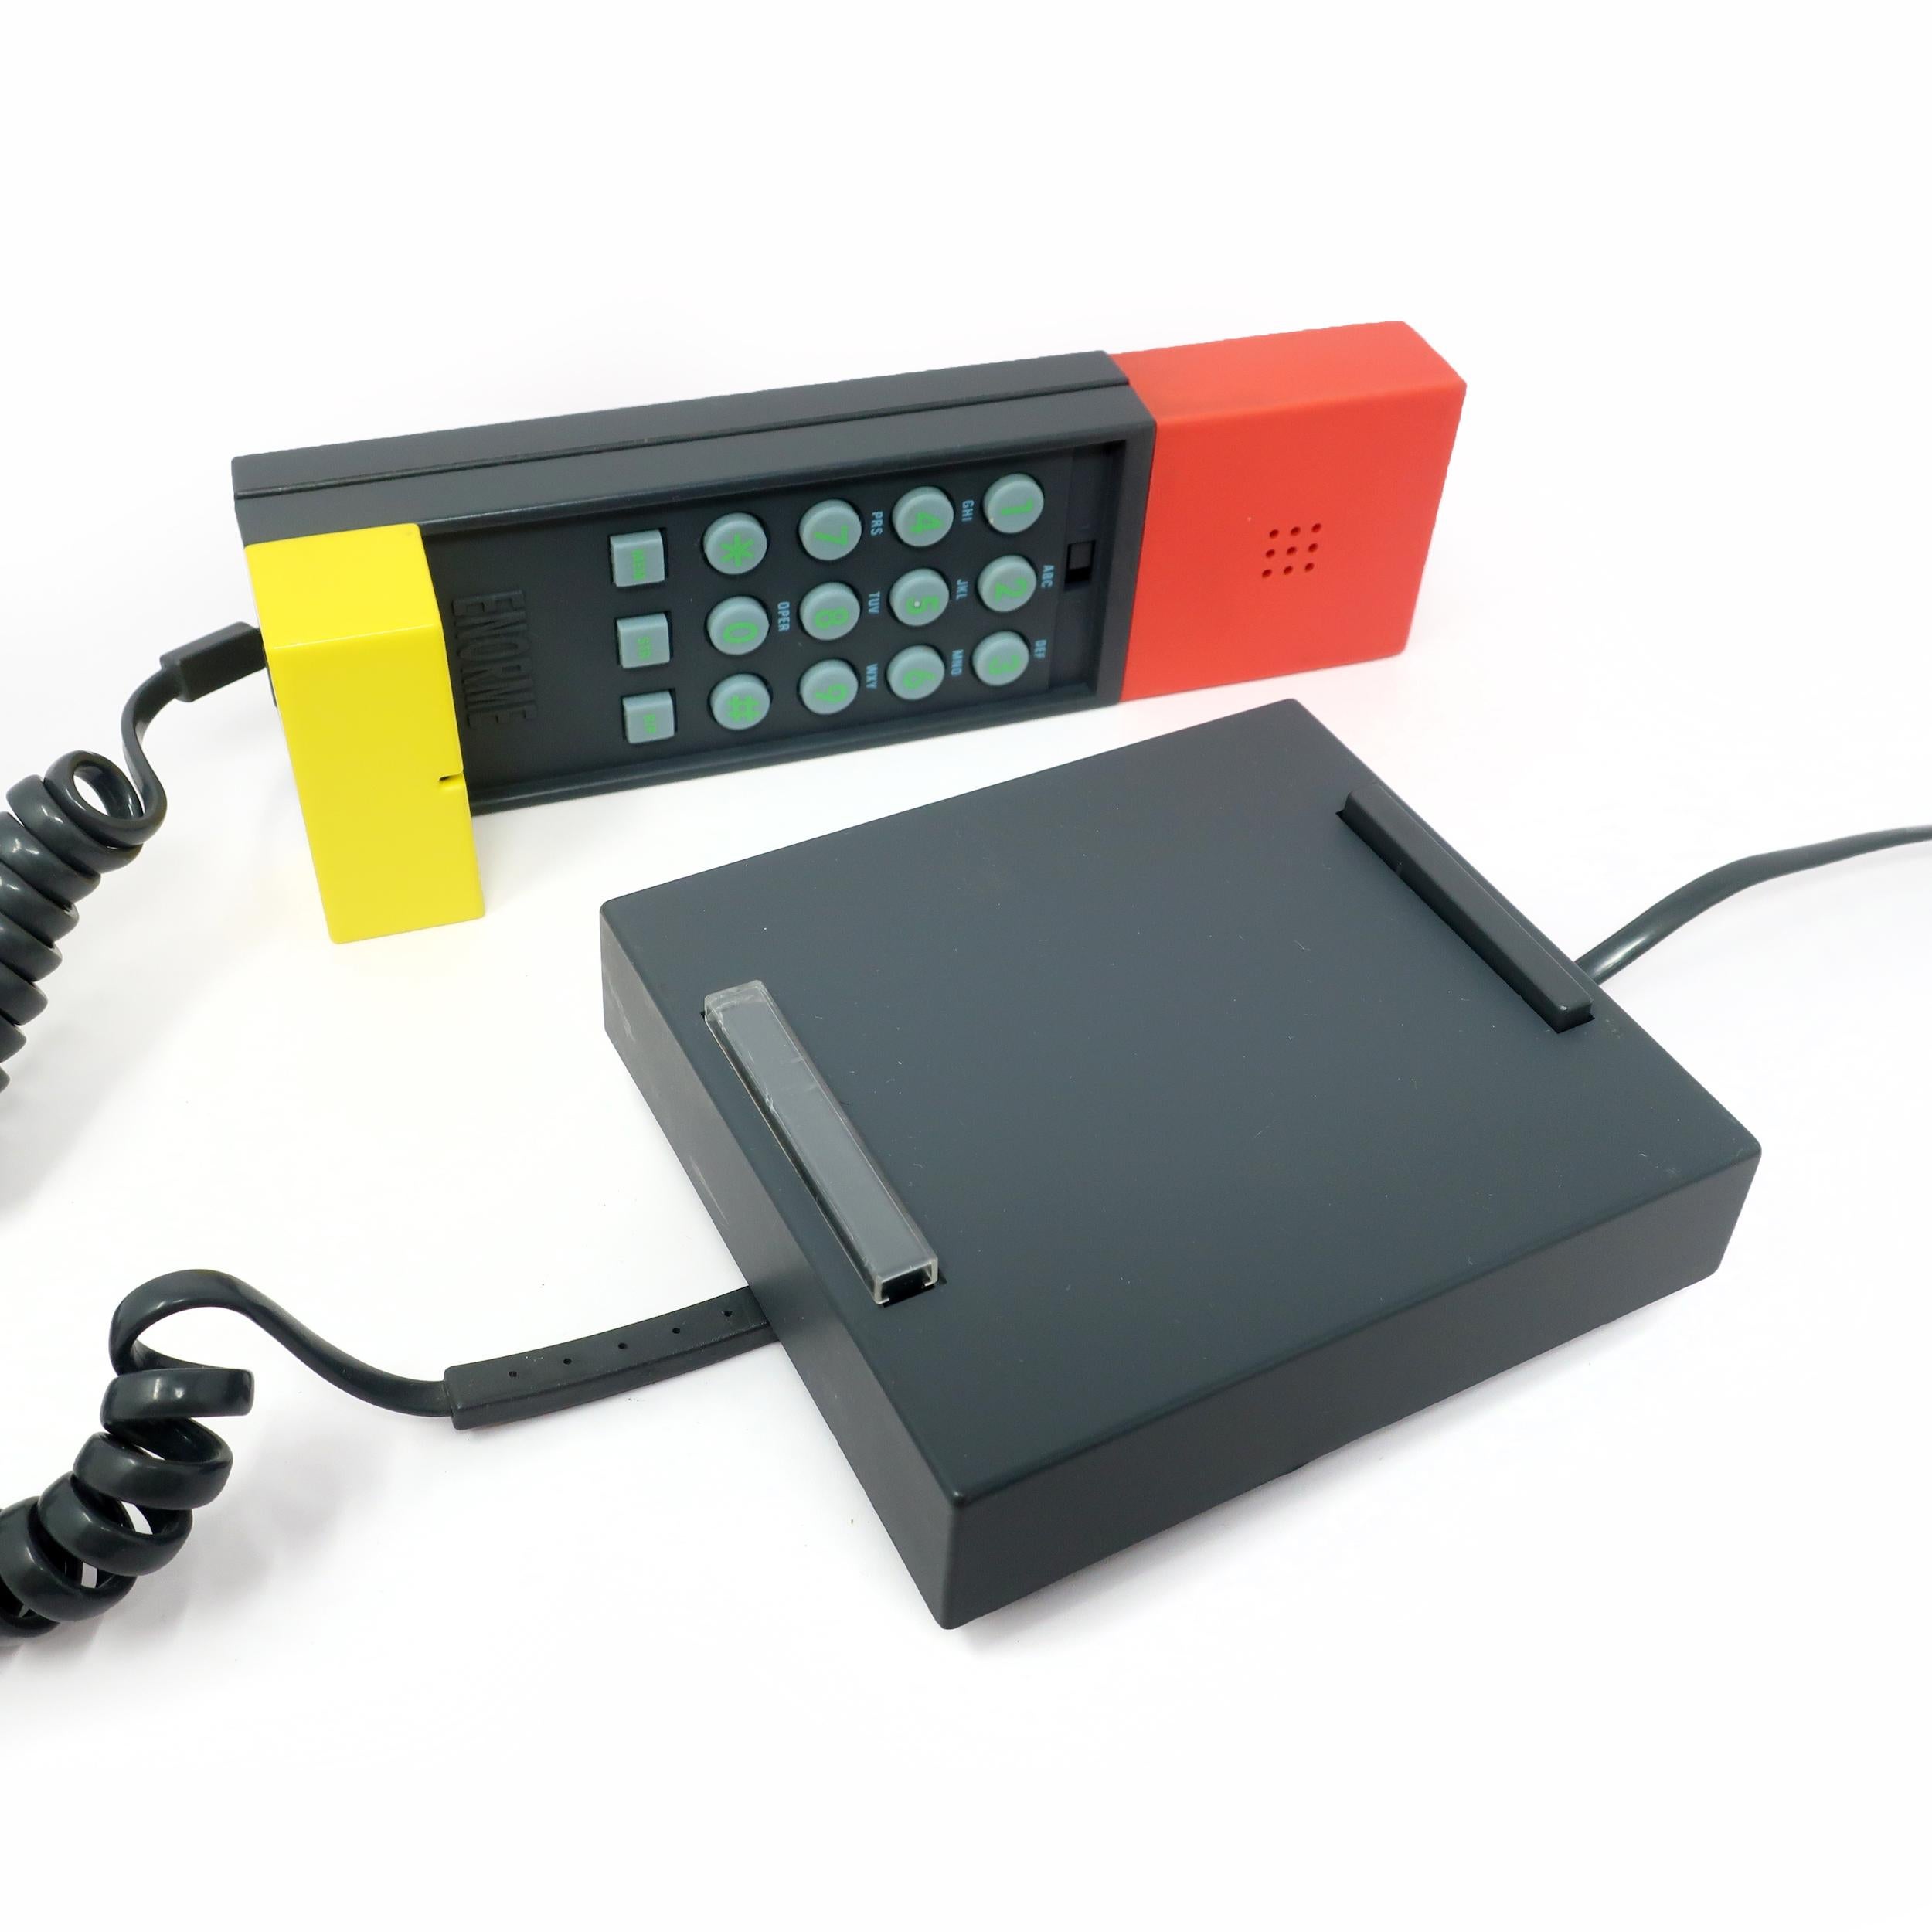 1986 Enorme Telephone by Ettore Sottsass for Enorme	 For Sale 2